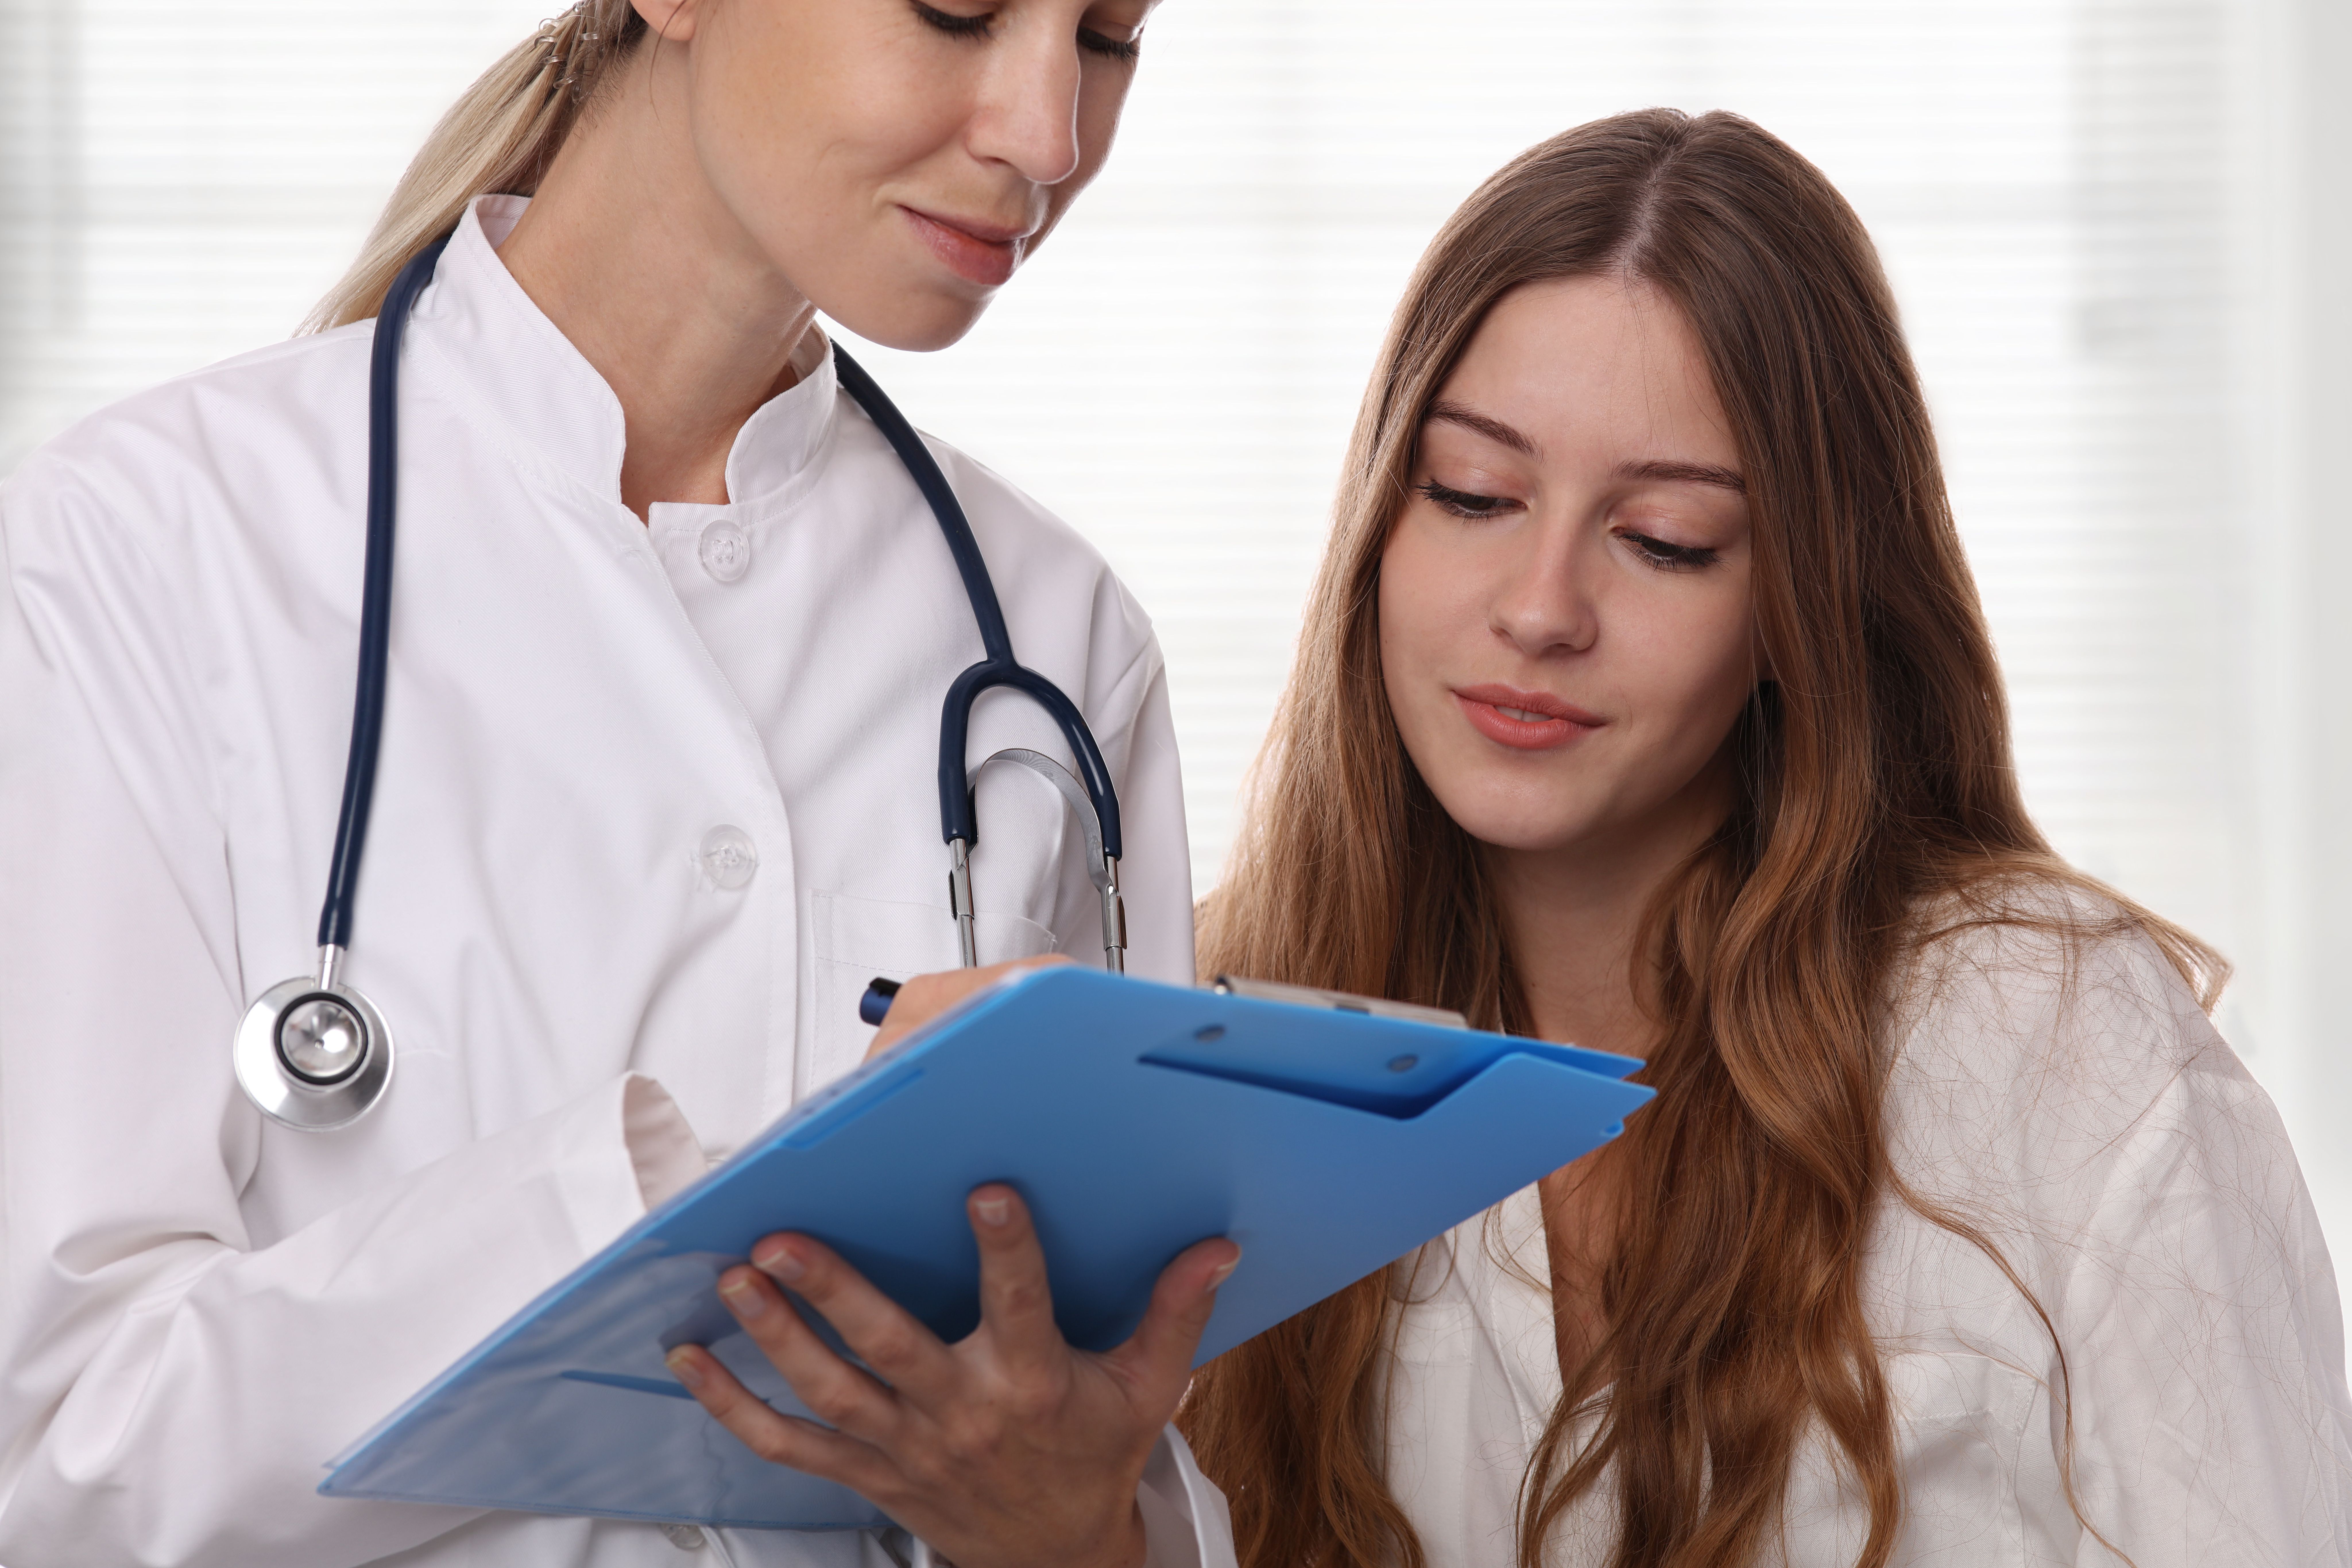 What Is Pediatric And Adolescent Gynecology